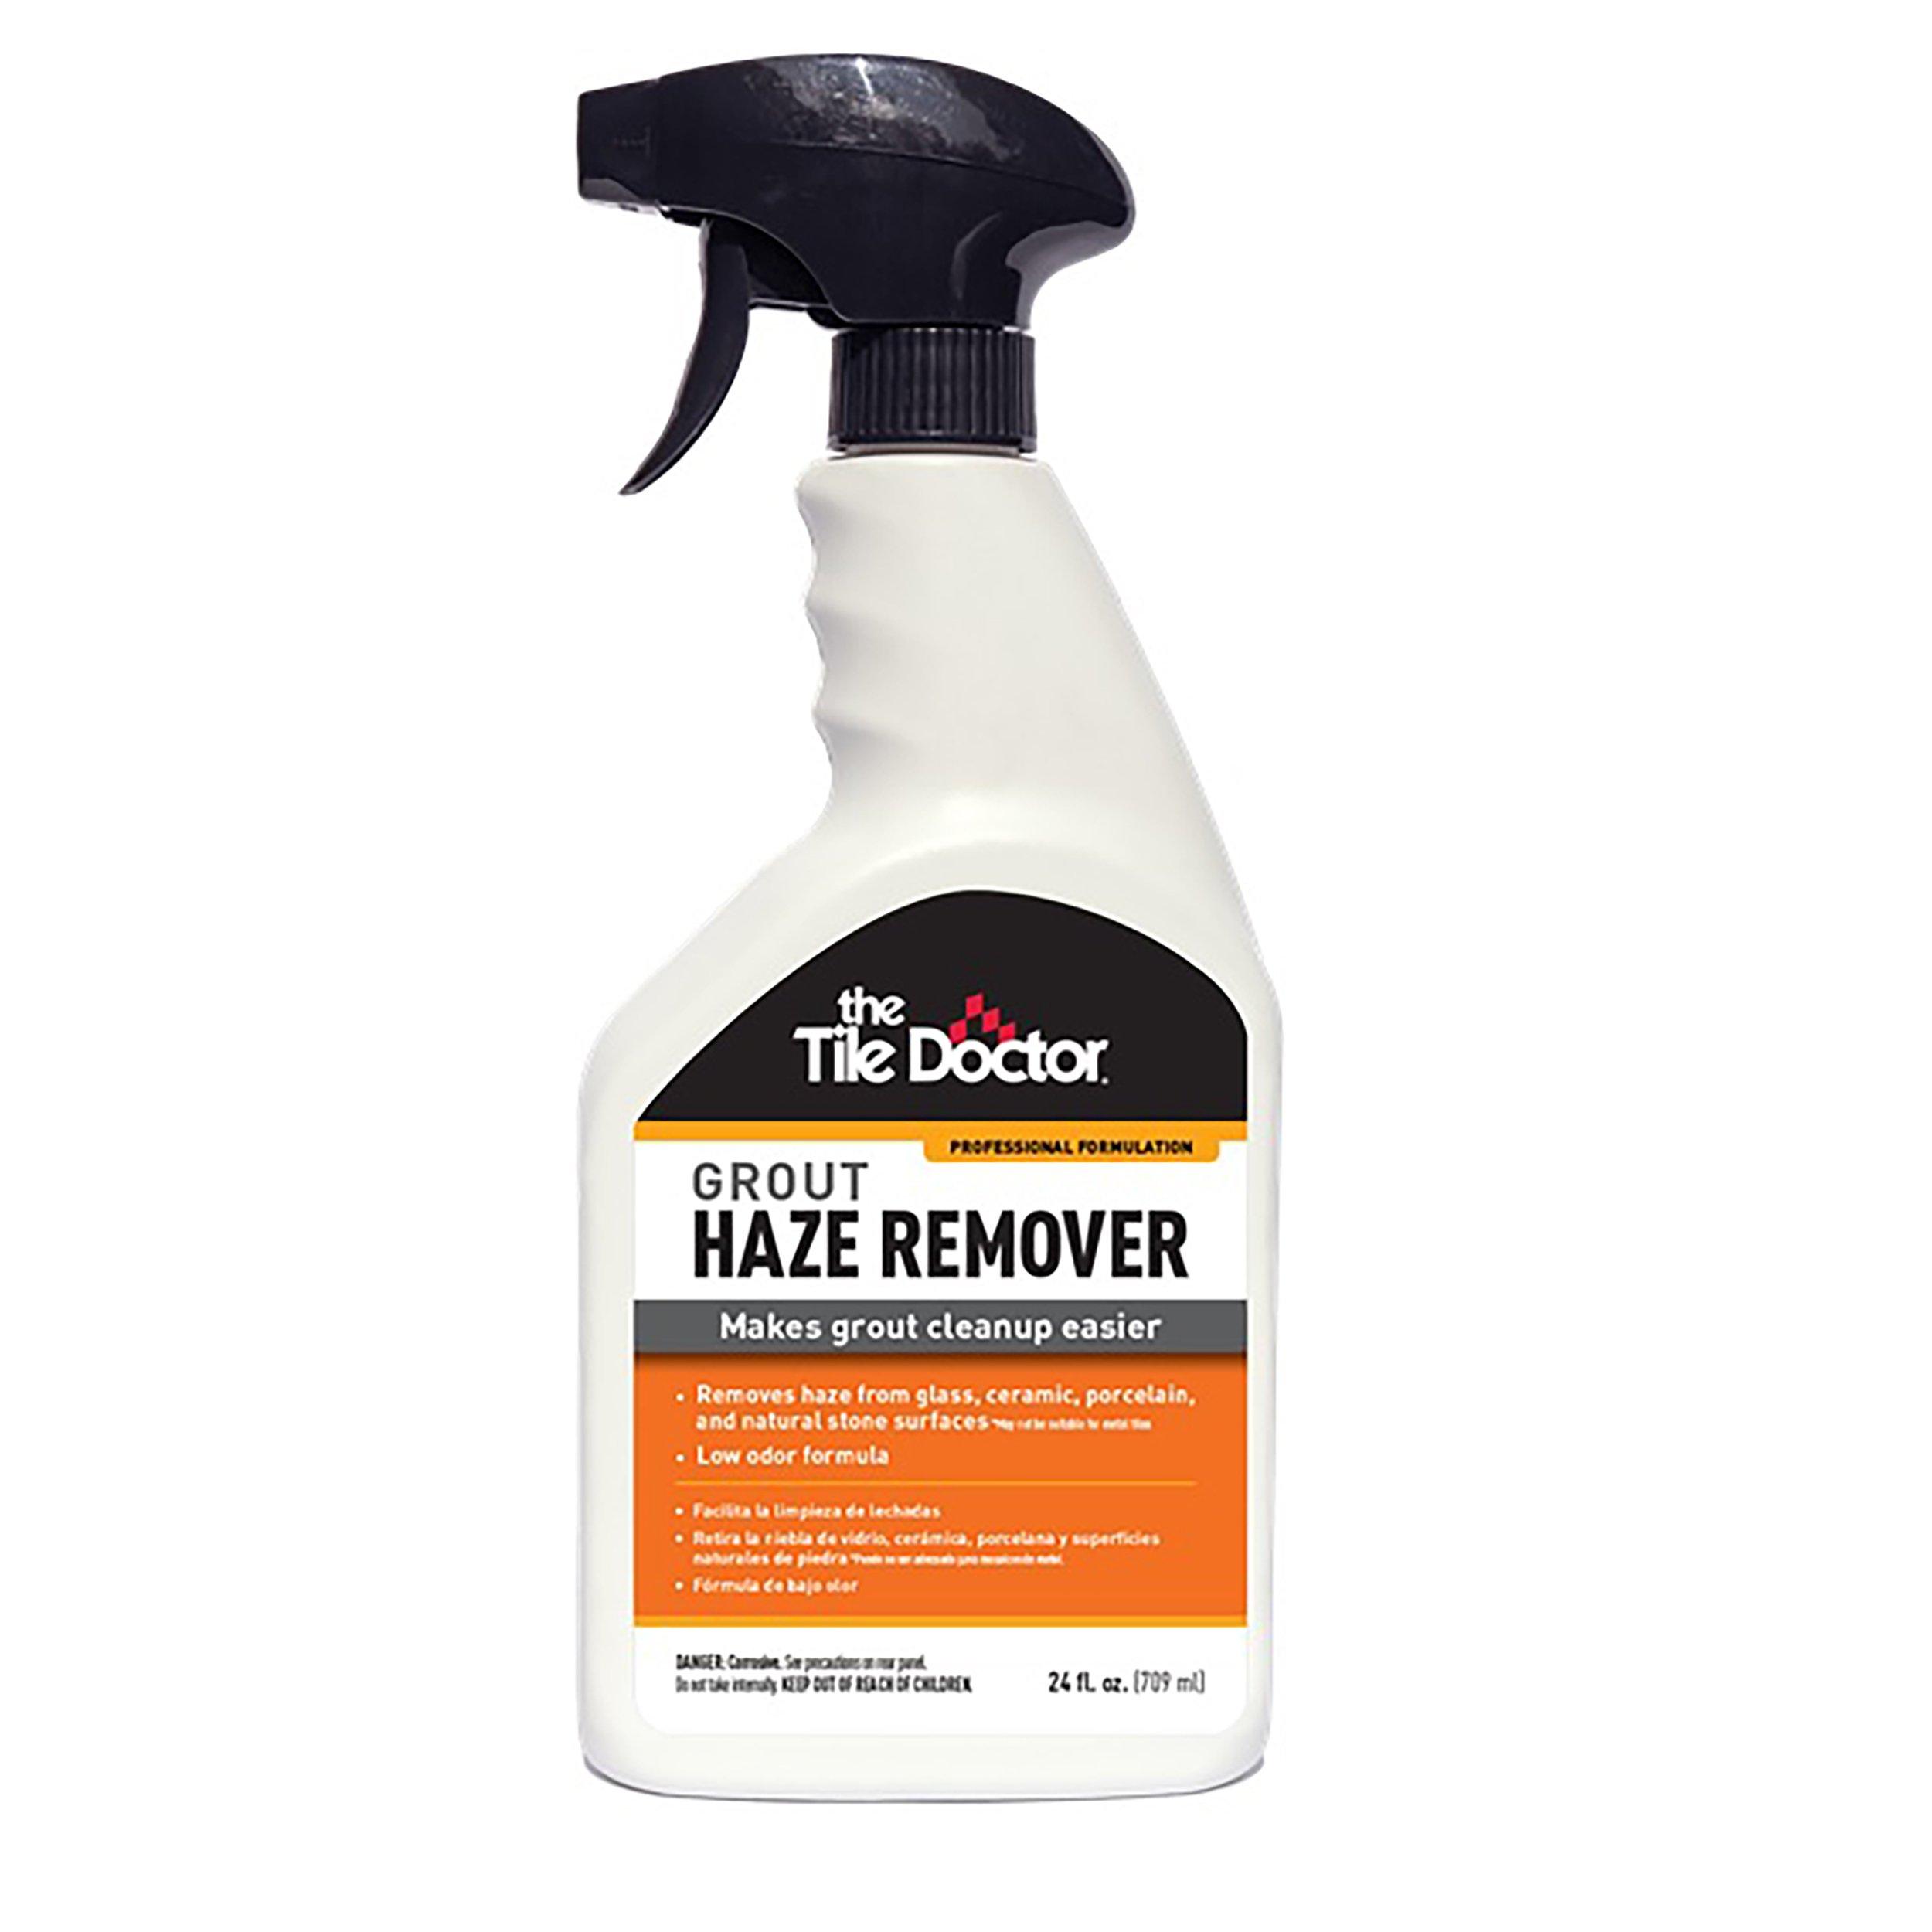 Tile Doctor Grout Haze Remover